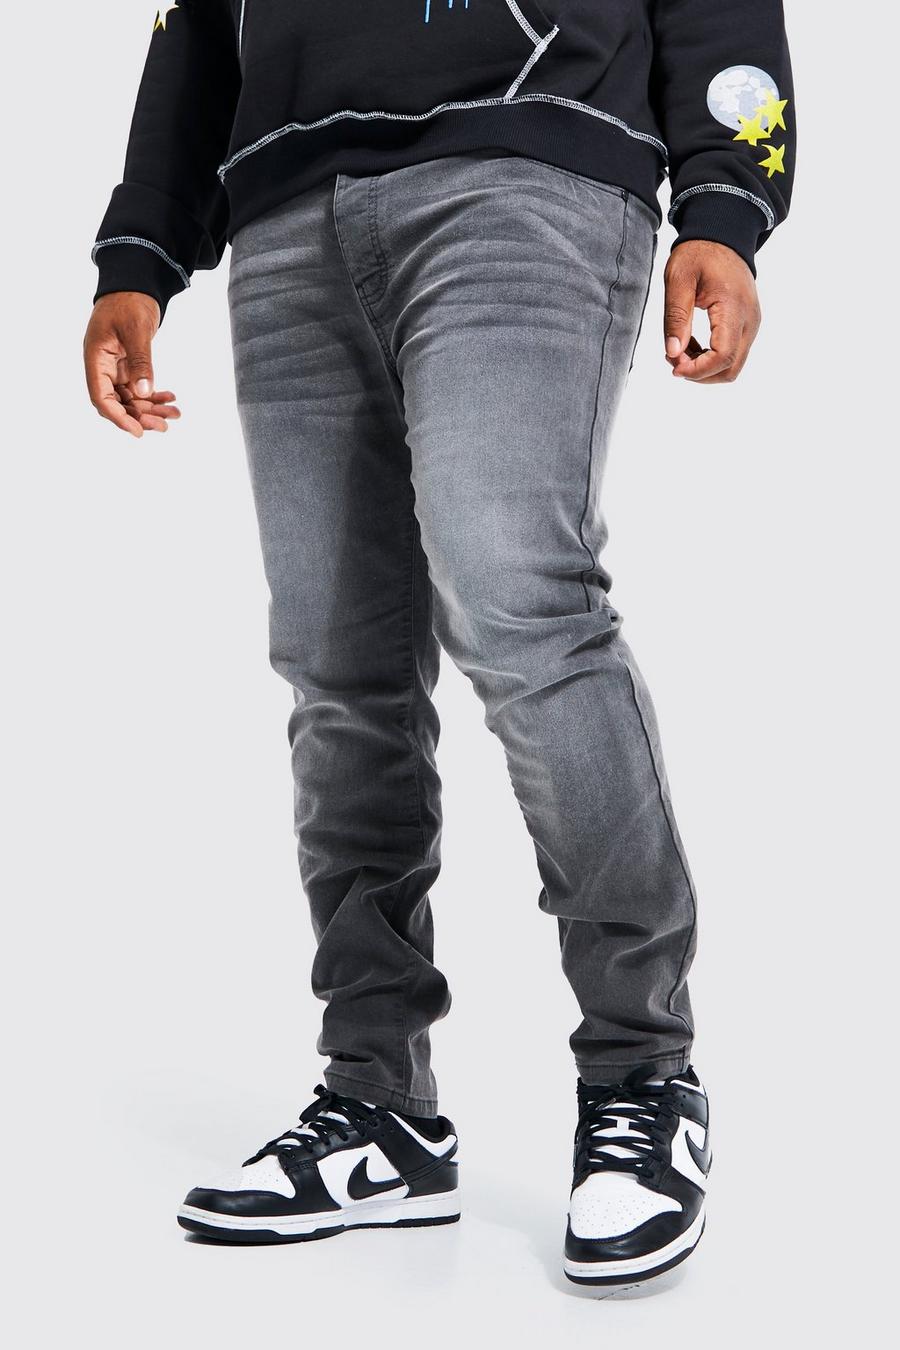 Grande taille - Jean stretch skinny, Charcoal grey